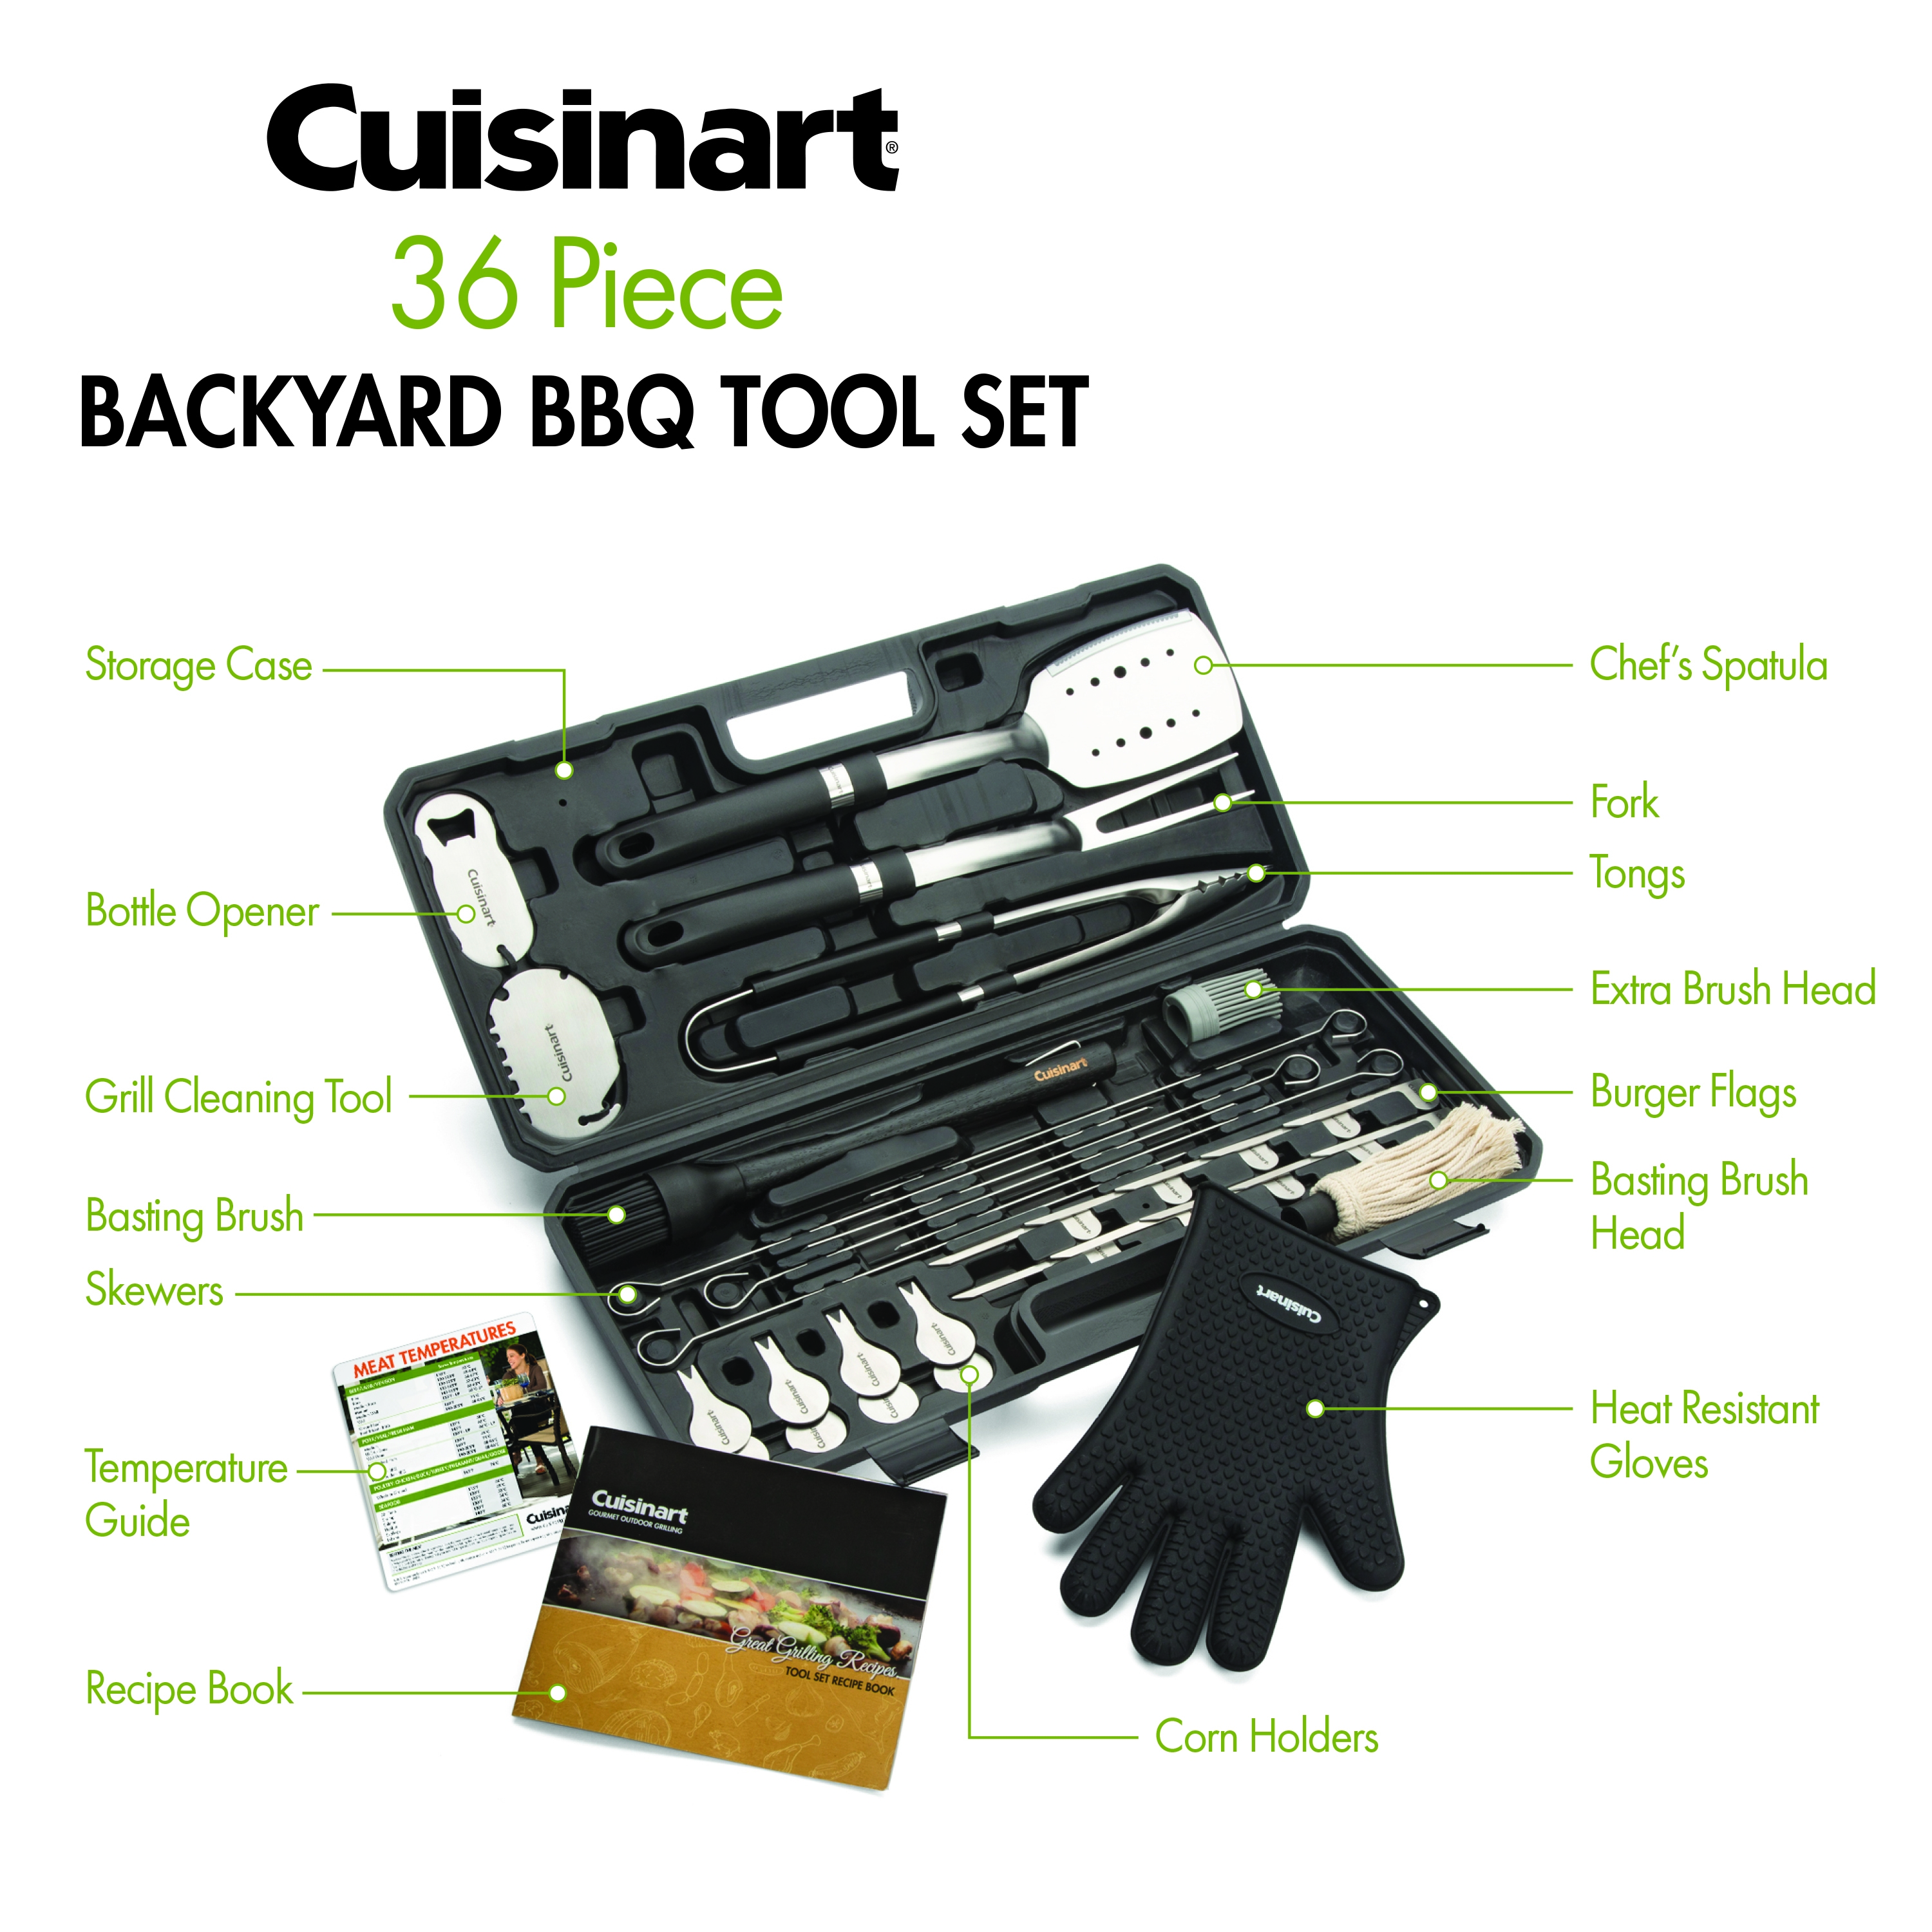 5-Piece Grill Tool Set with Case